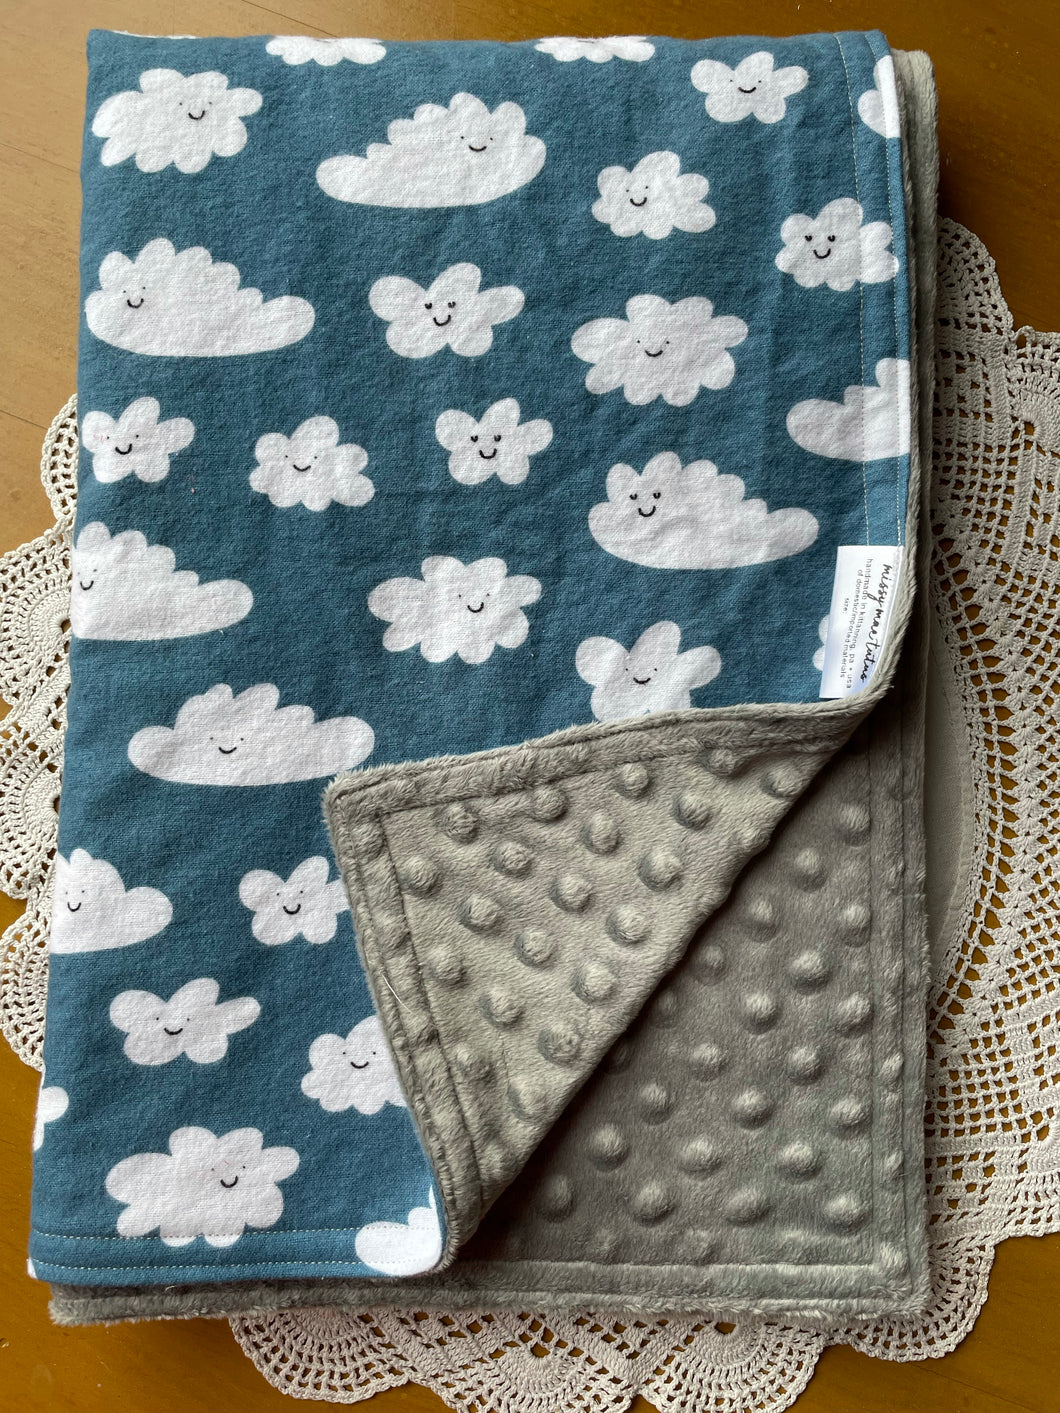 Happy Clouds Flannel and Minky Blanket